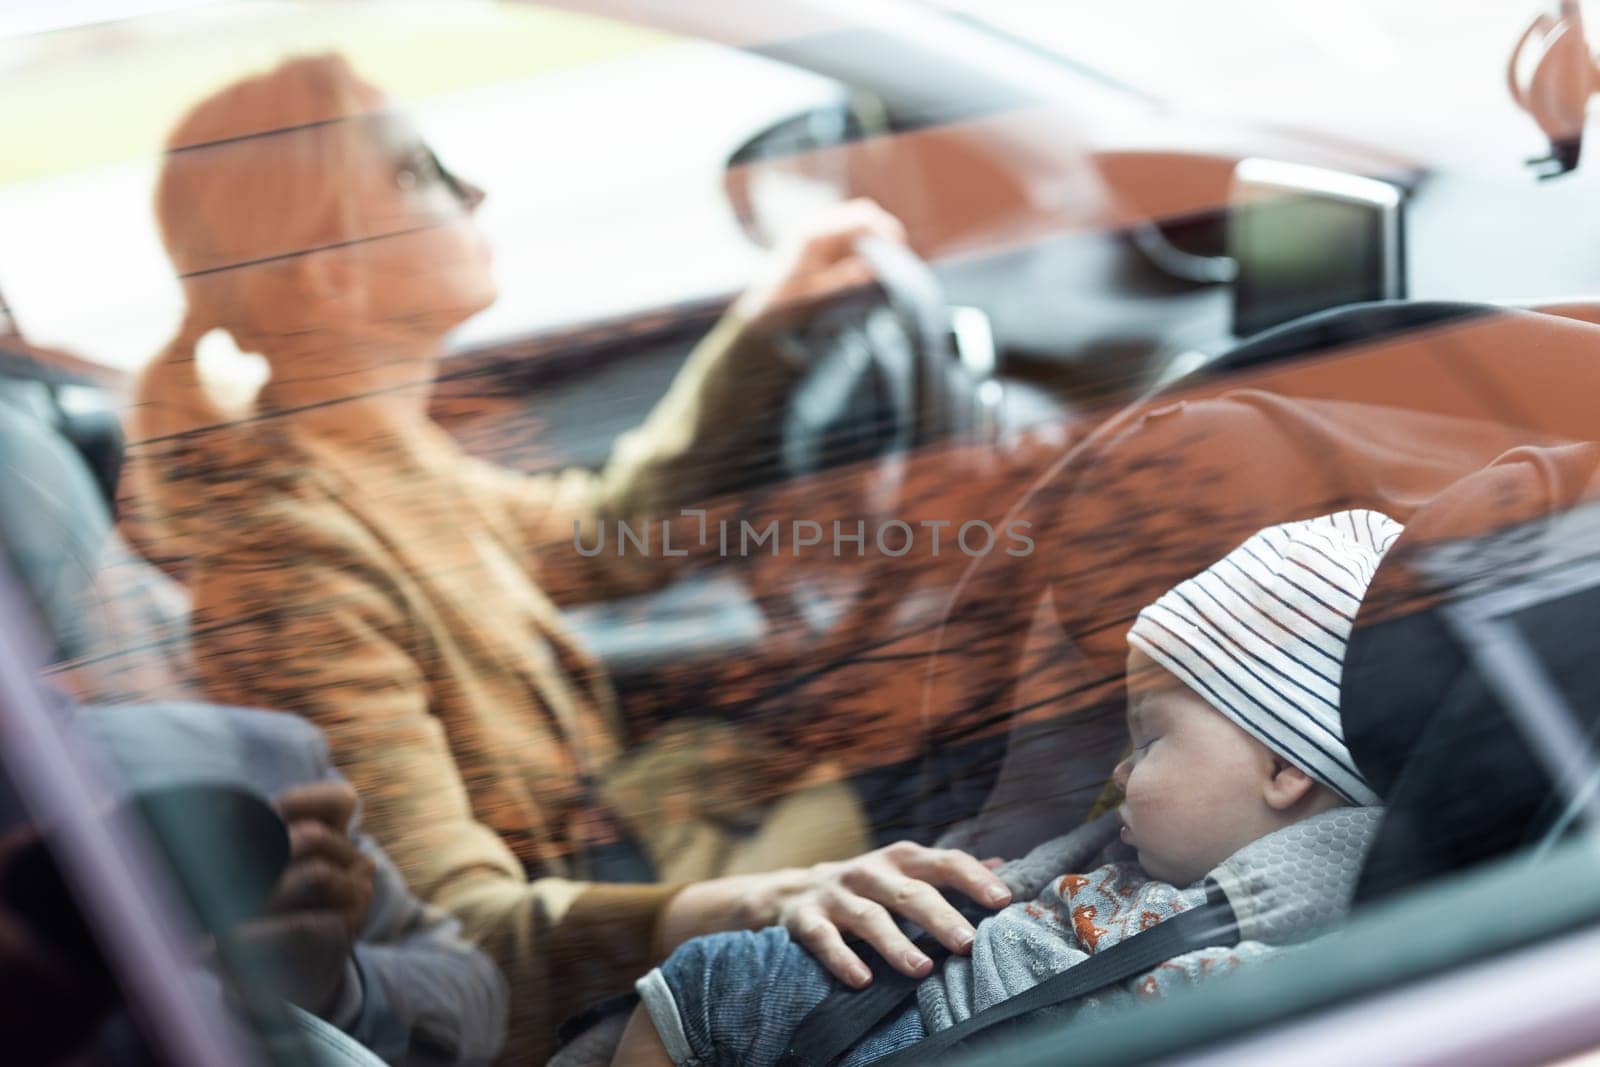 Mother concentrating on driving family car running errands while her baby sleeps in infant car seat by her site. by kasto